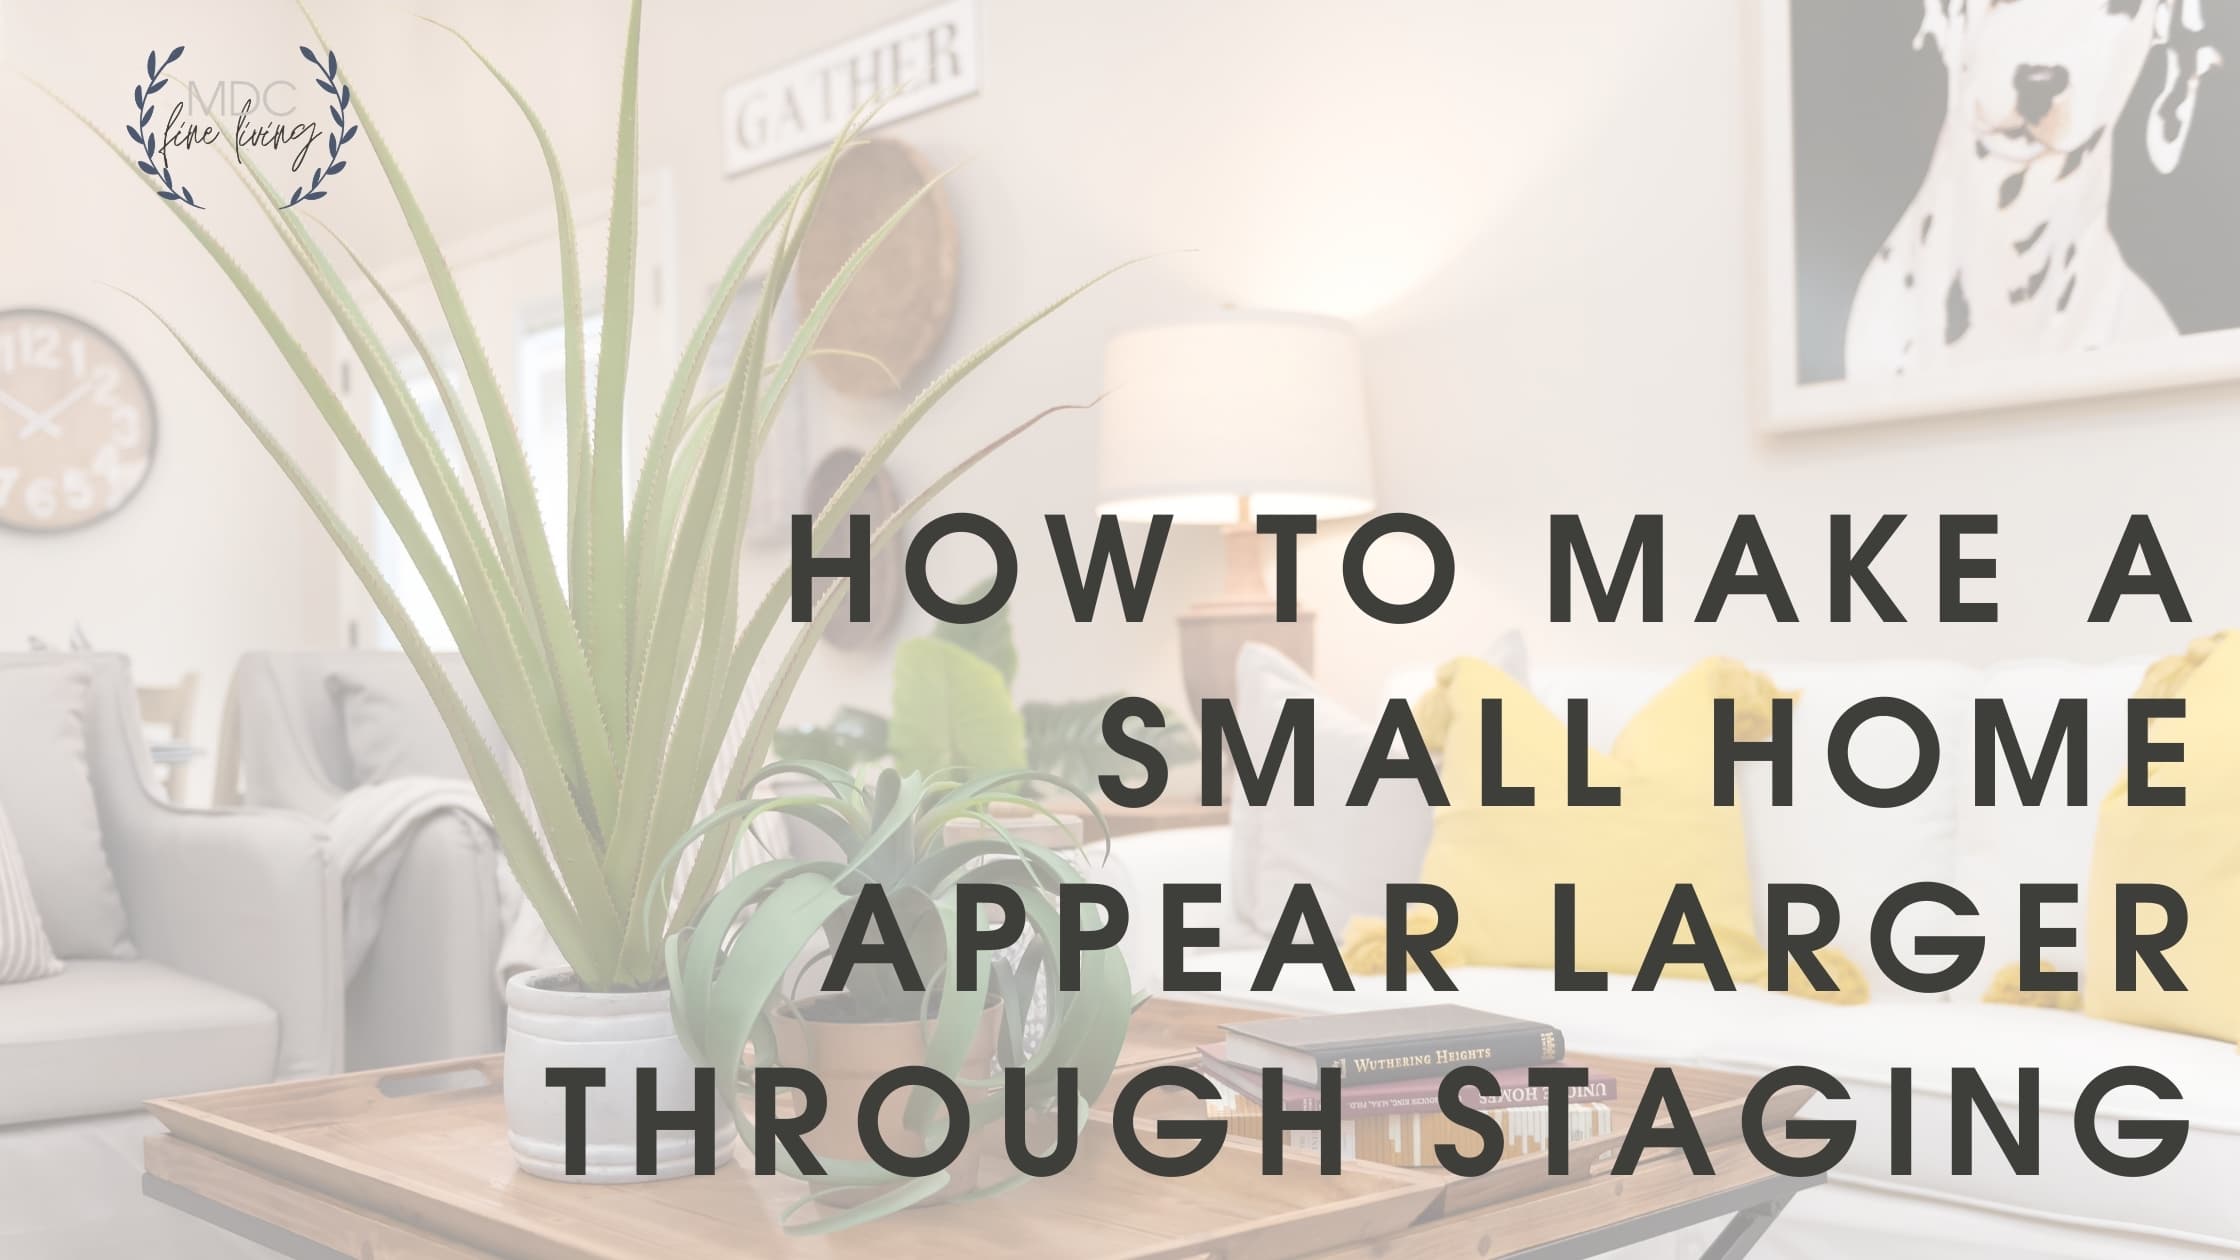 Title card for post that reads, "Make a Small Home Appear Larger Through Staging."